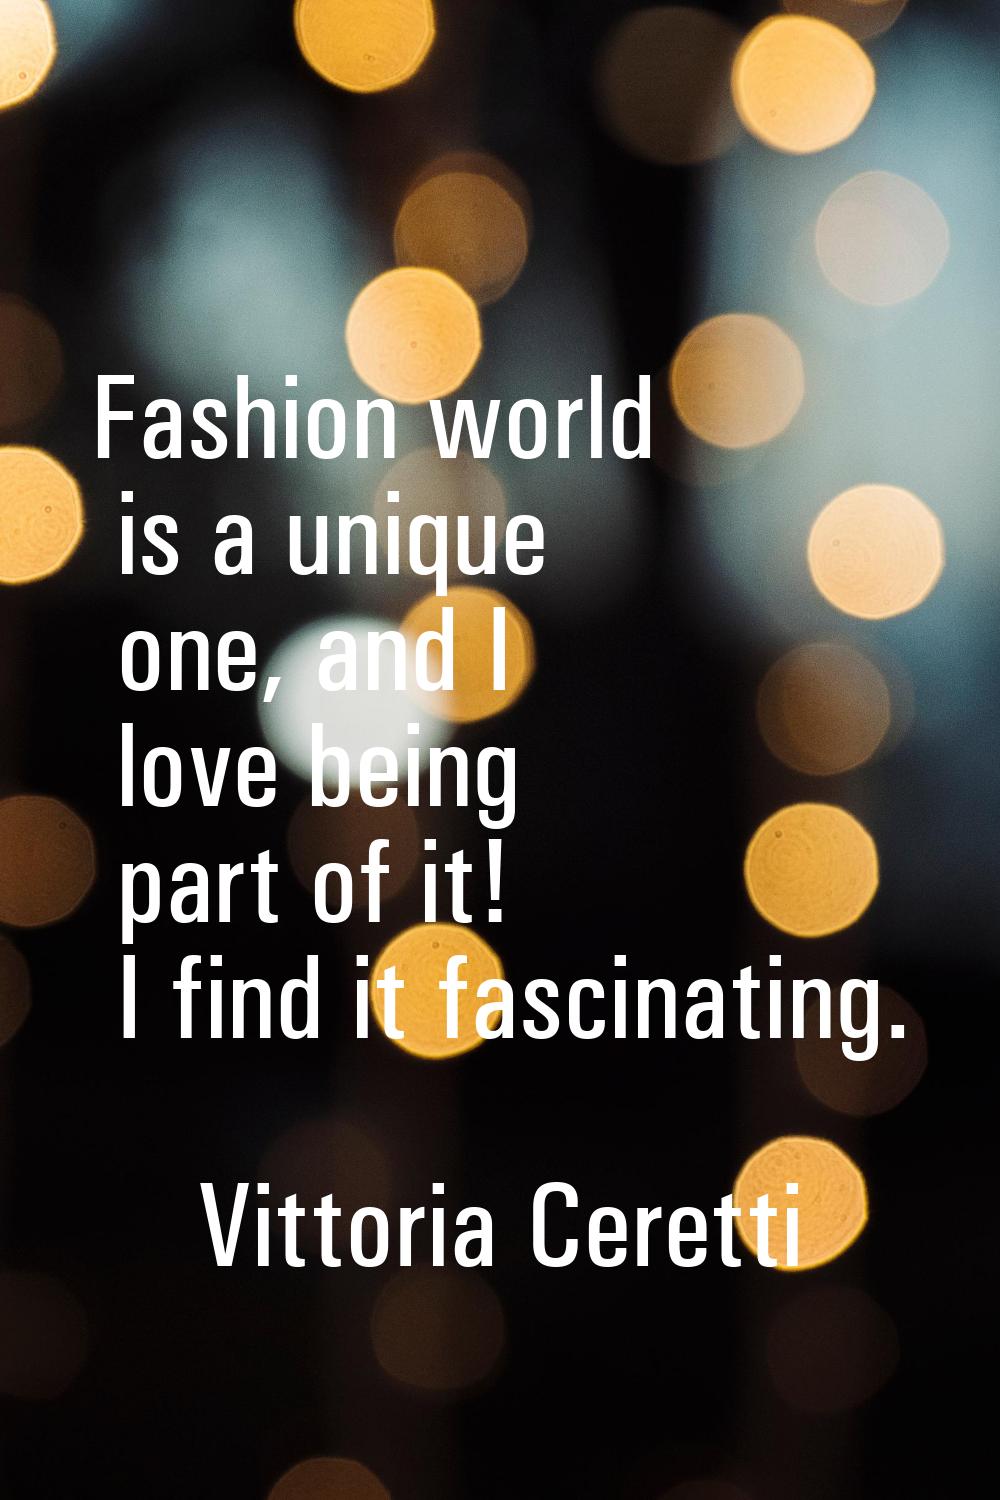 Fashion world is a unique one, and I love being part of it! I find it fascinating.